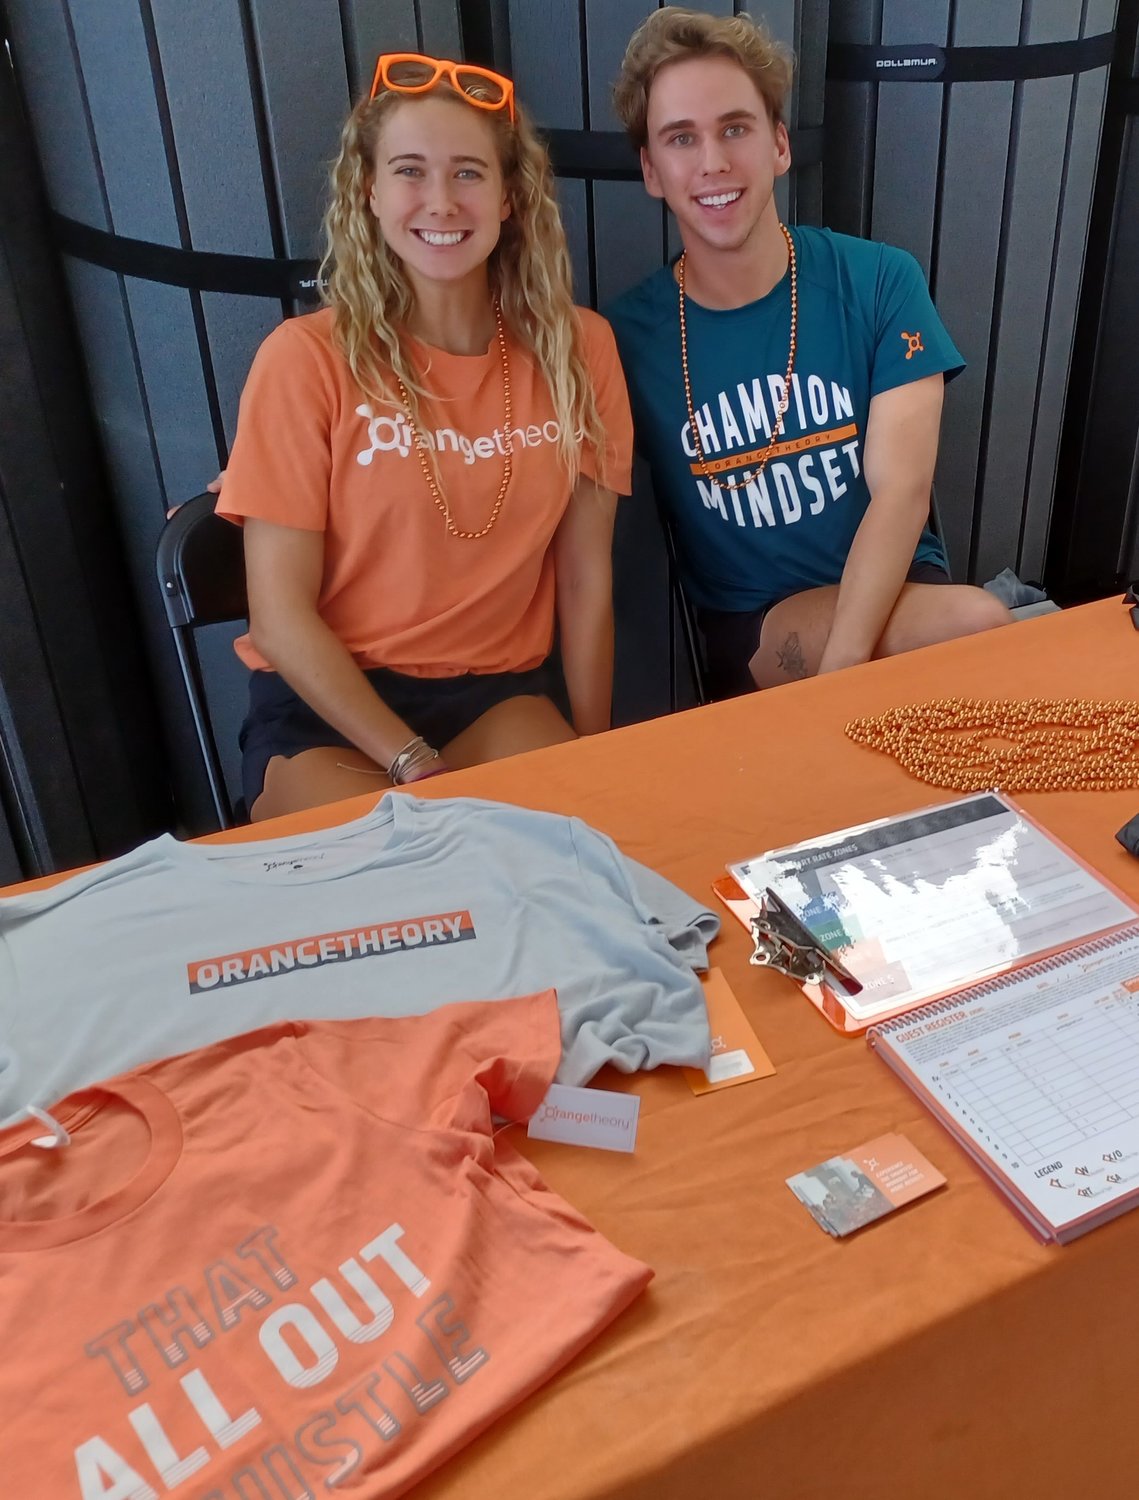 Katy Morgan and Elijah Brooks were at the Orange Theory table to tell visitors about the Nocatee fitness center.